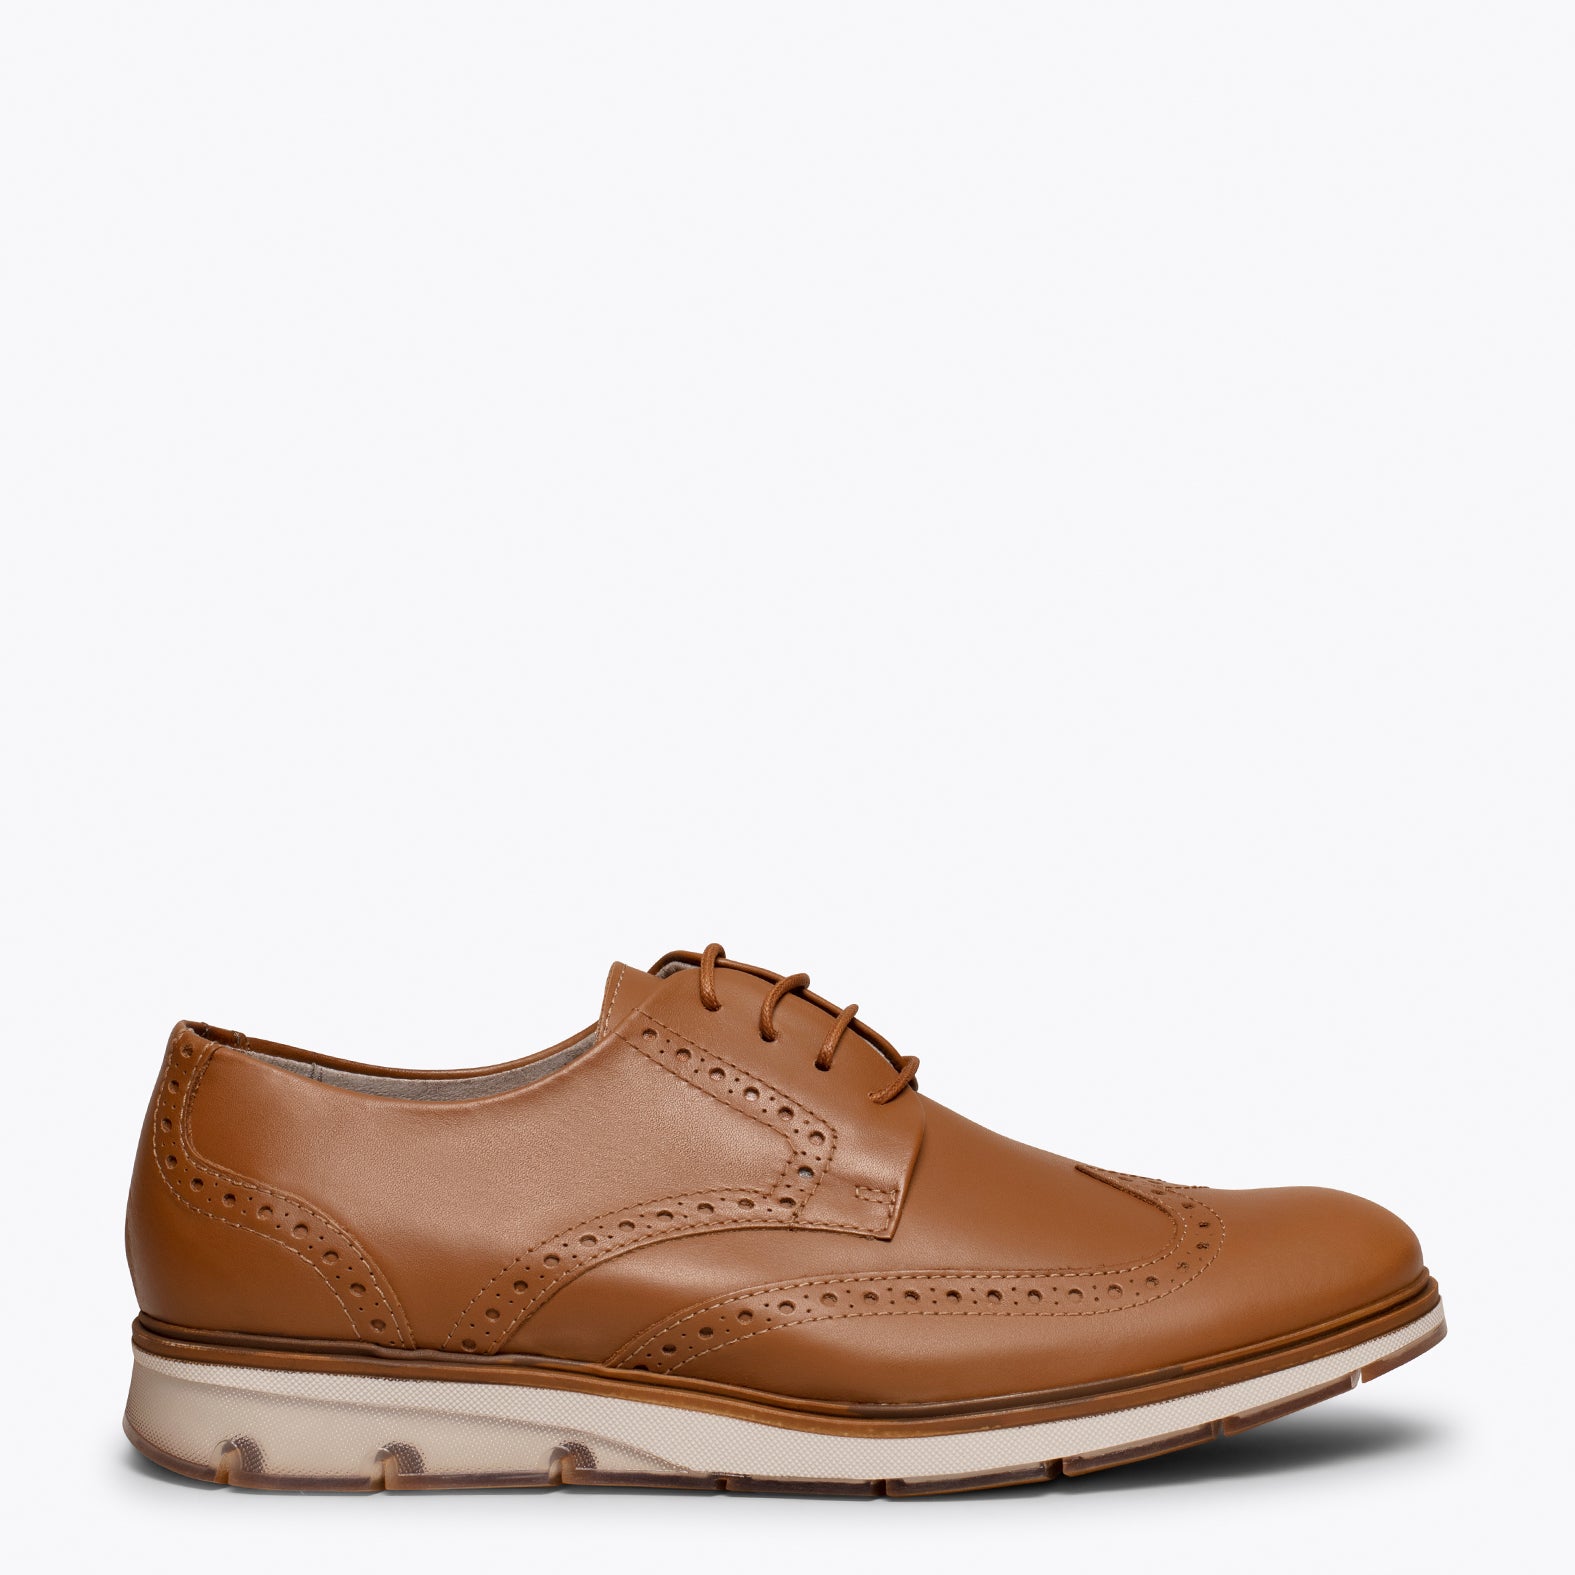 OXFORD – CAMEL classic english style brogue